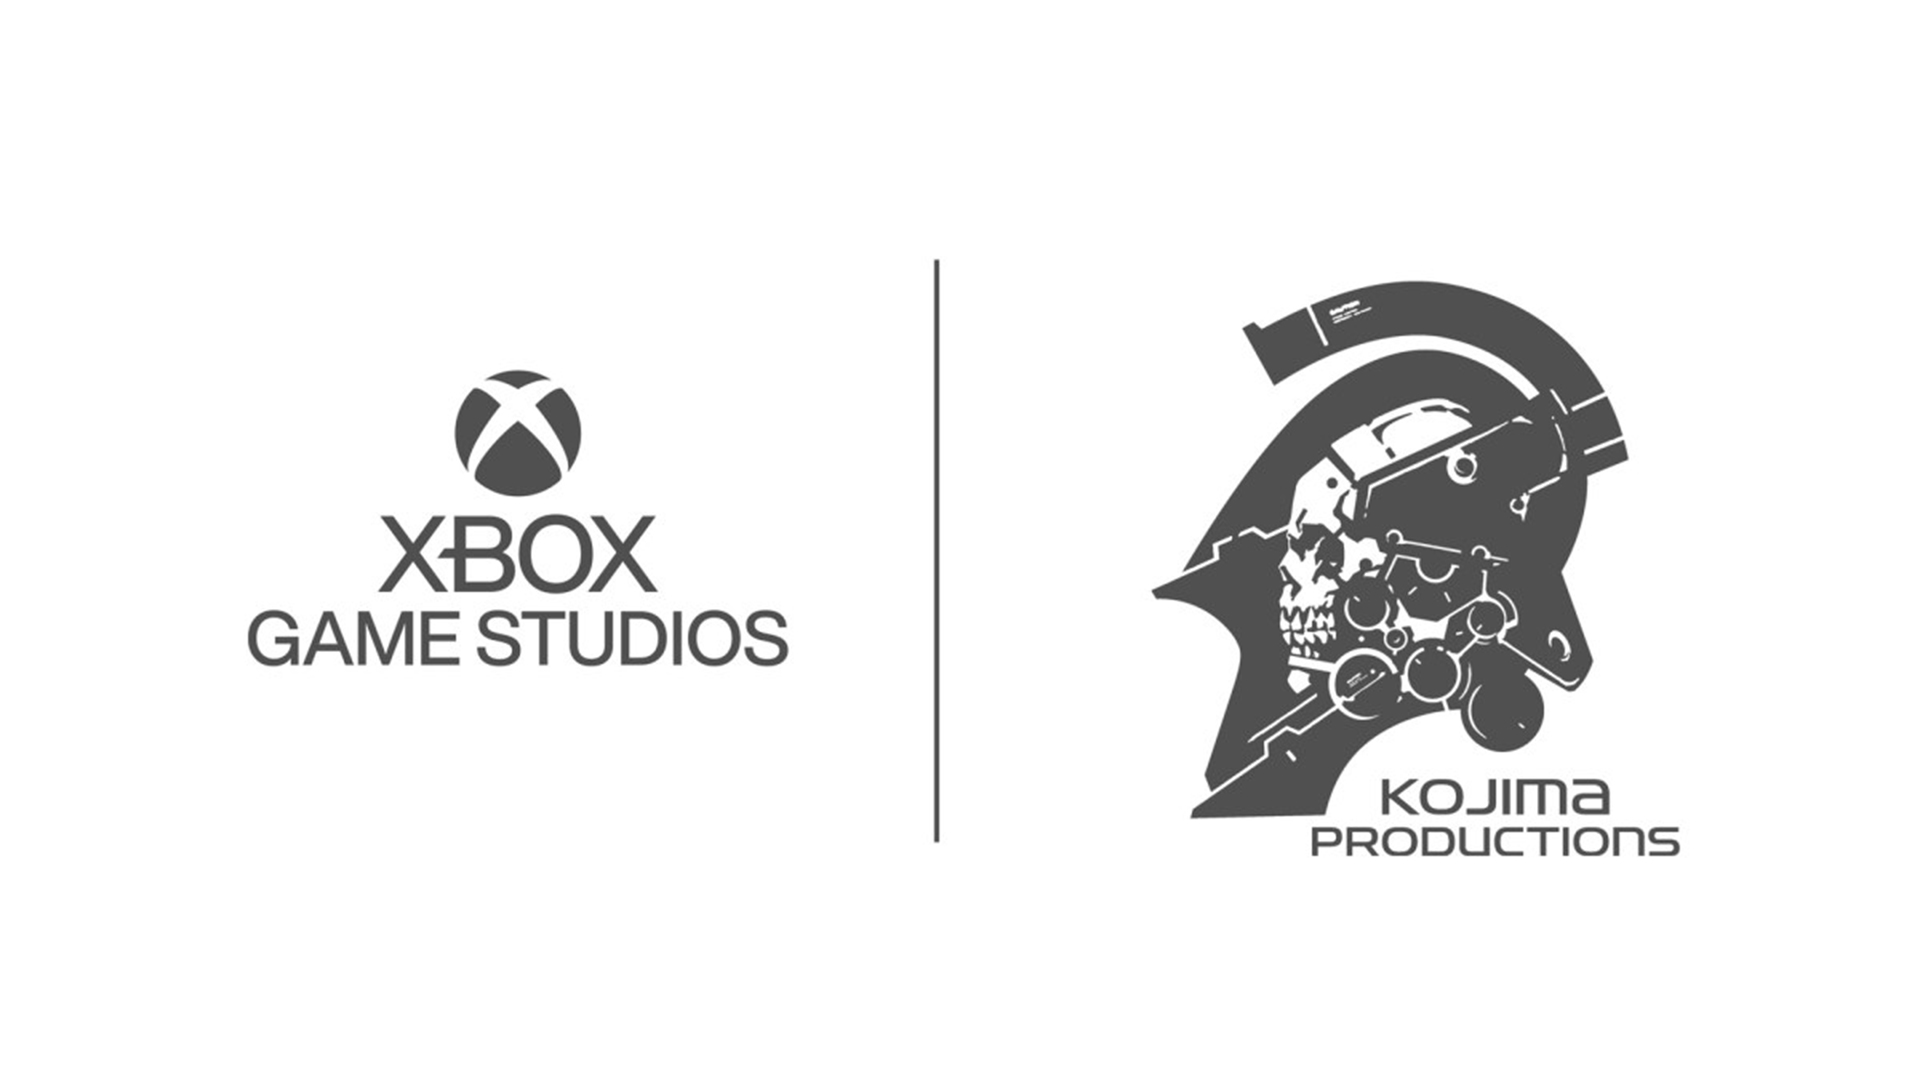 Why the Xbox Game Studios and Kojima Productions partnership matters